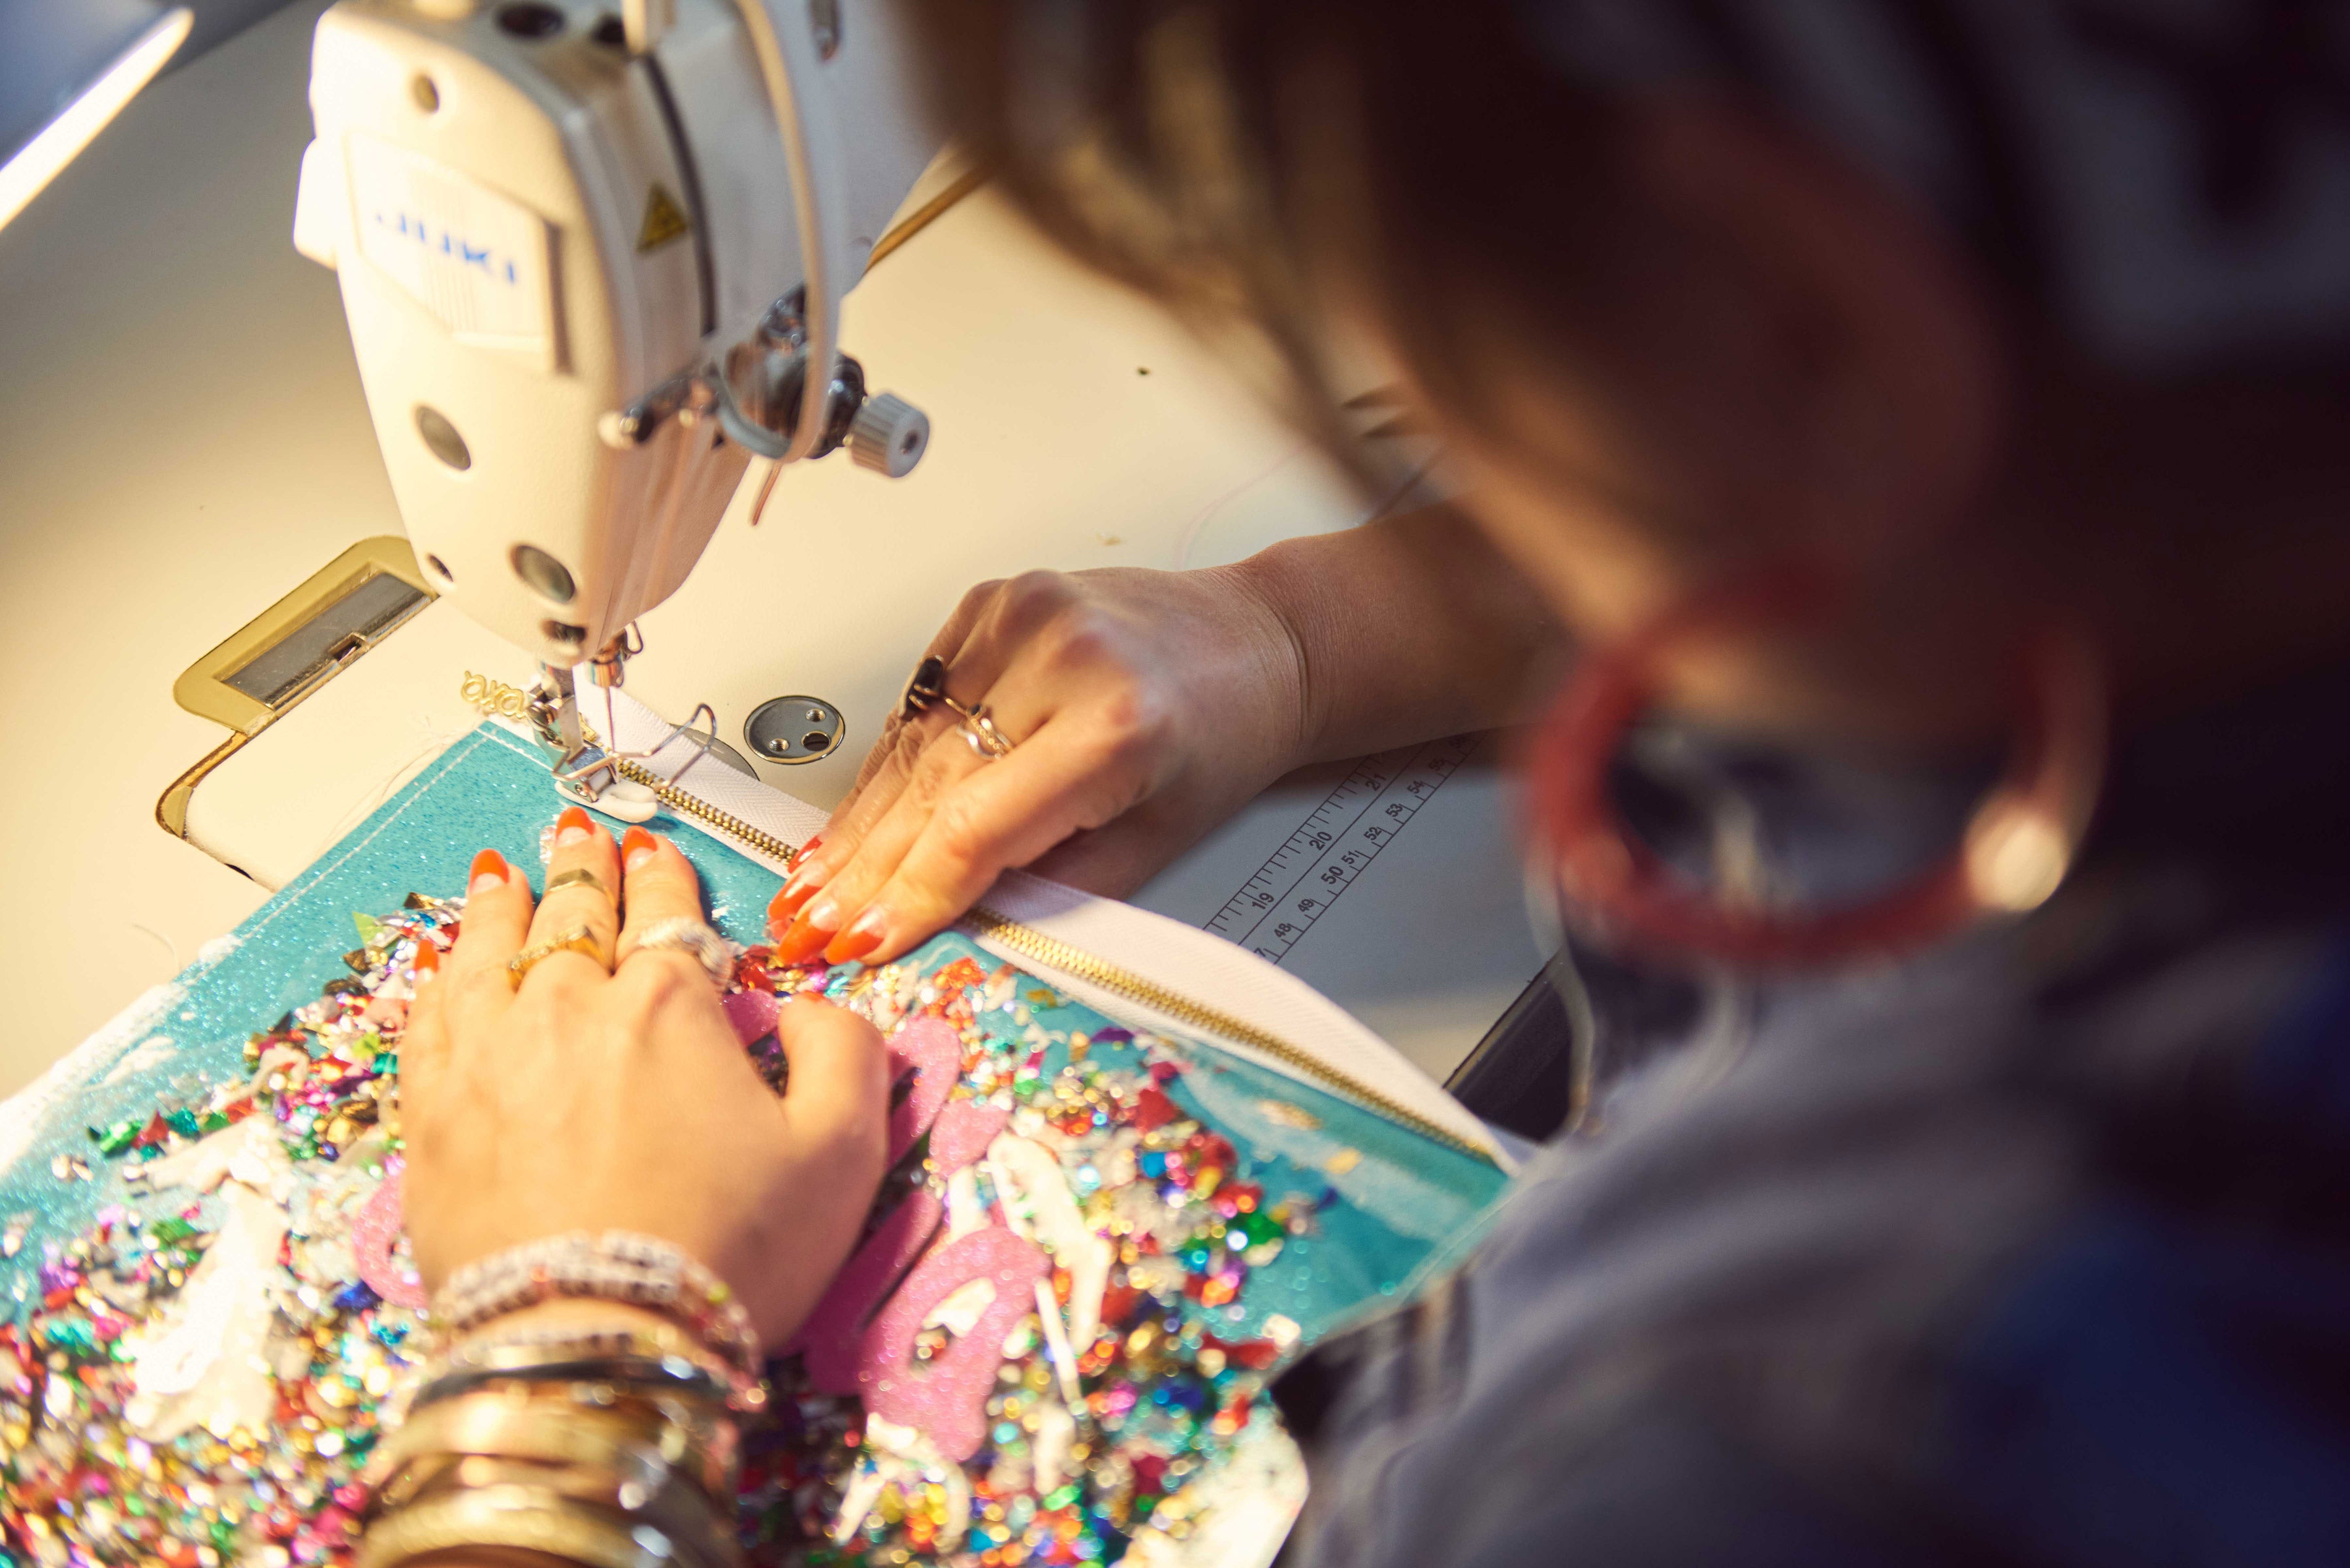 julie mollo sews on an industrial juki machine making a custom clutch that has confetti inside it. clutch is blue glitter vinyl with rainbow confetti on top and the name julia in pink glitter canvas